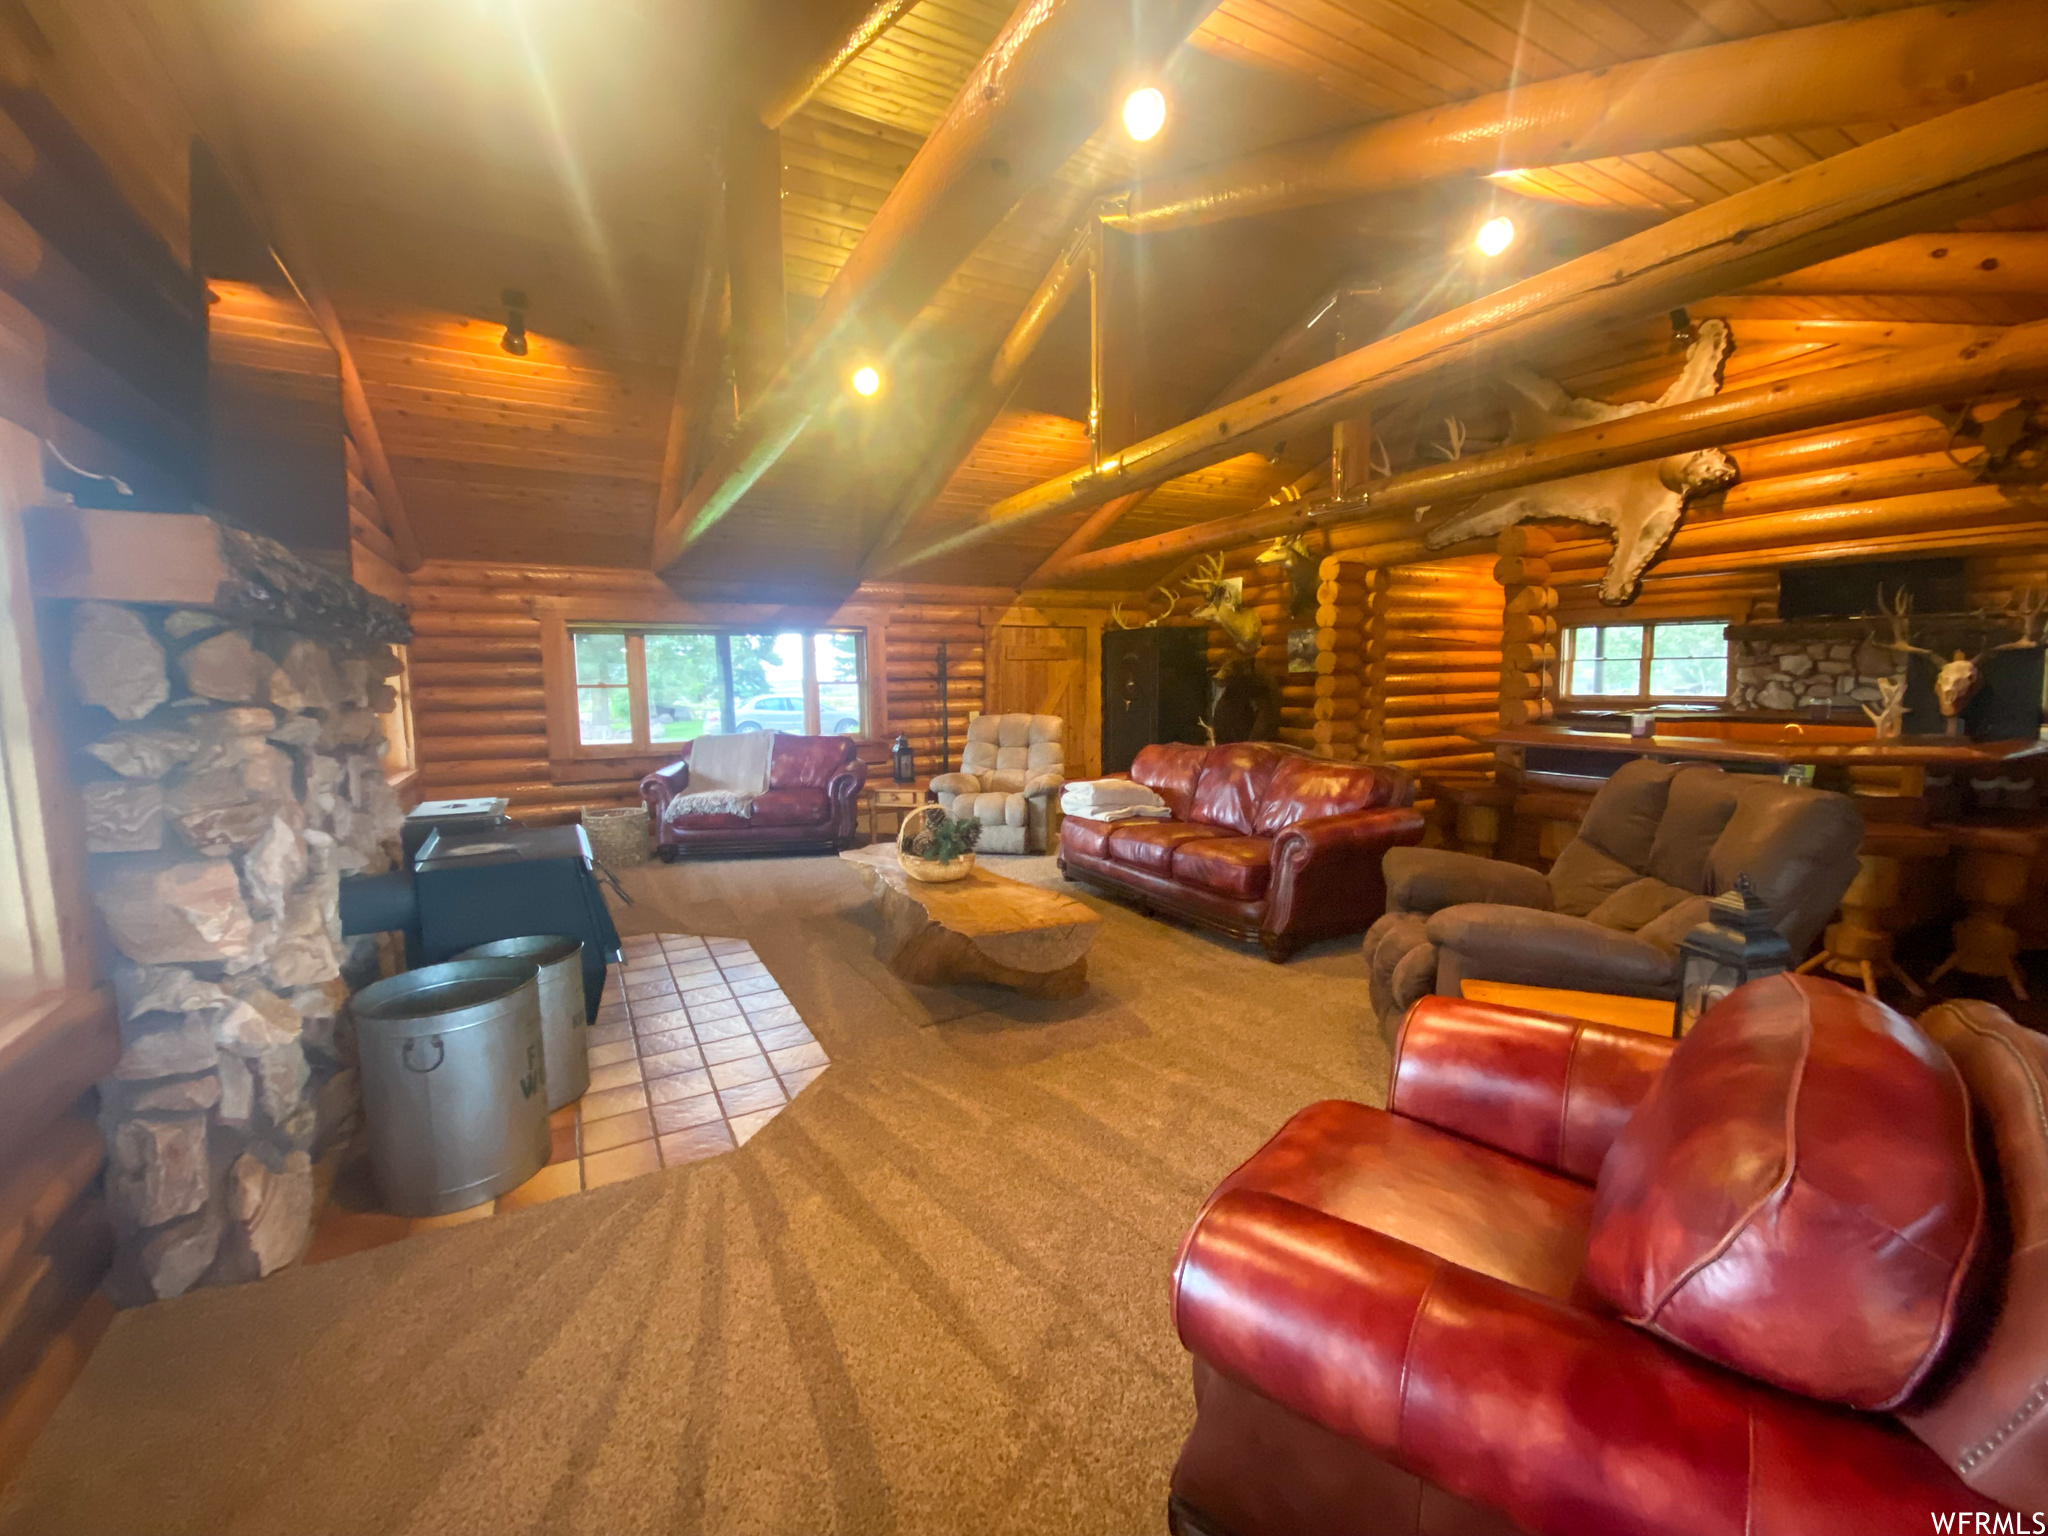 Carpeted living room featuring wood ceiling, high vaulted ceiling, and rustic walls